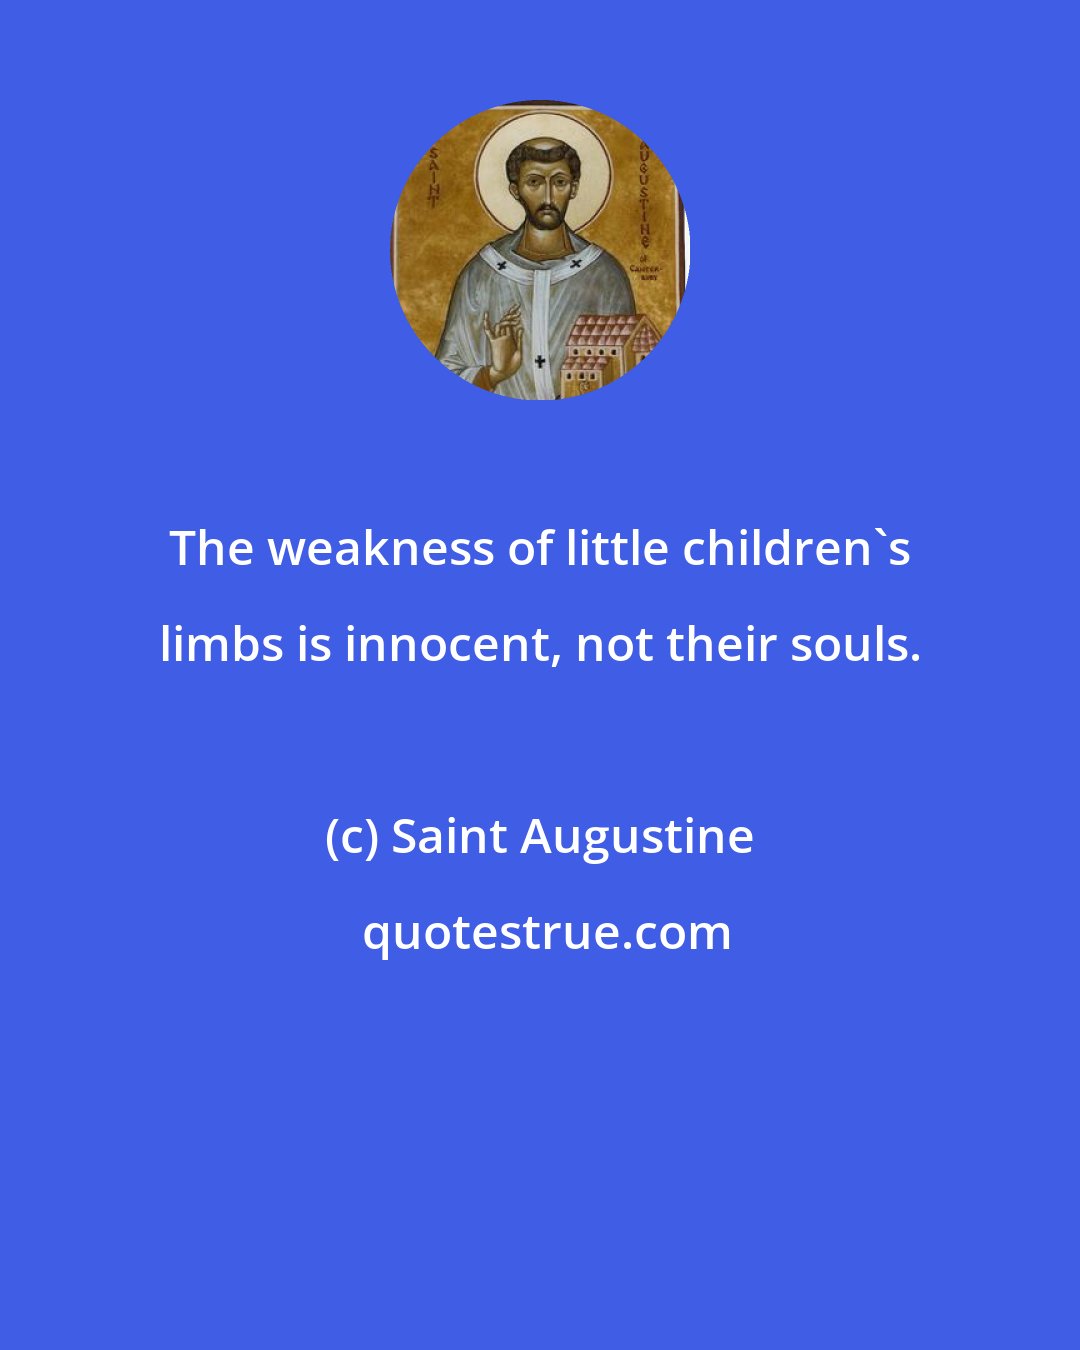 Saint Augustine: The weakness of little children's limbs is innocent, not their souls.